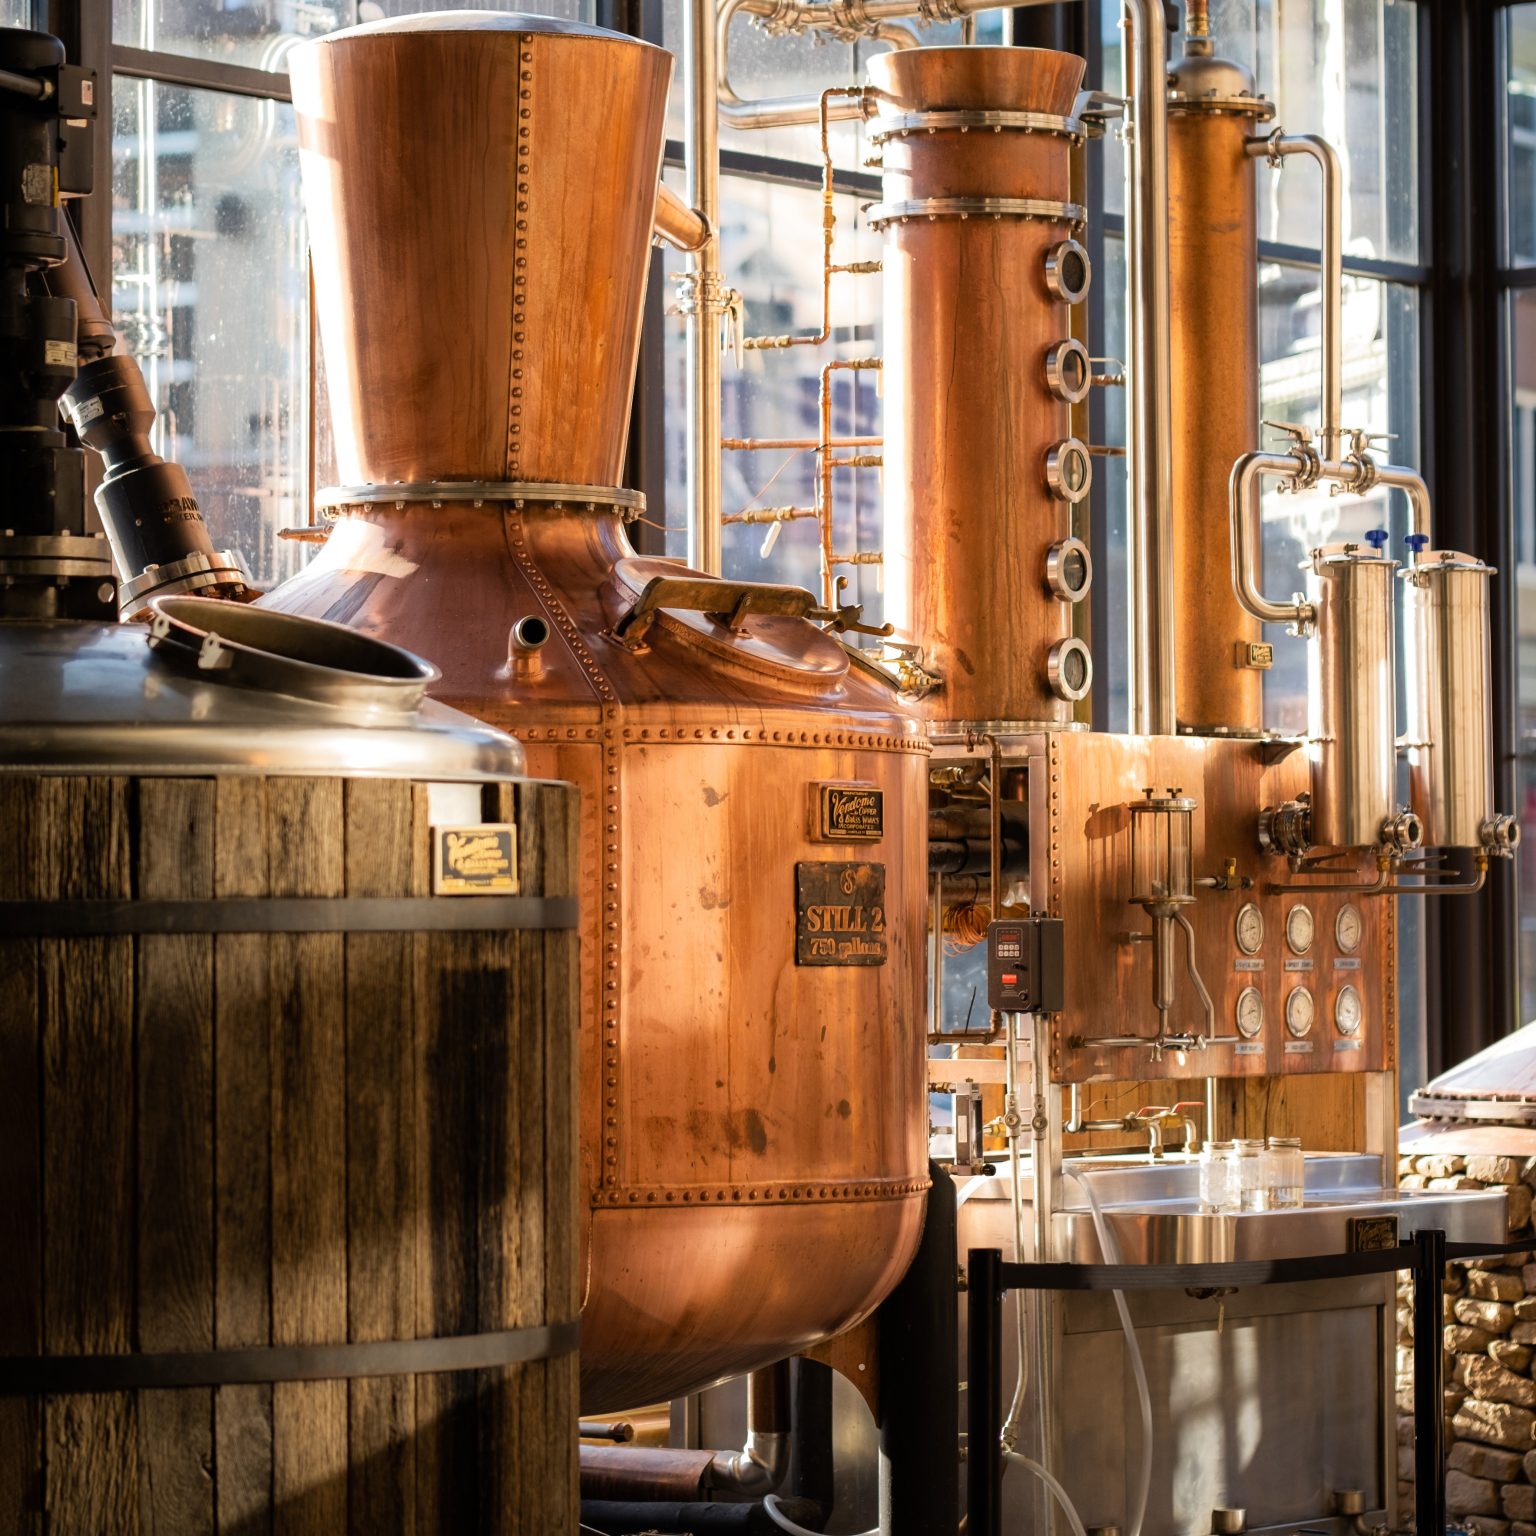 Sugarlands Distilling Company – Producers of Authentic Sugarlands Shine